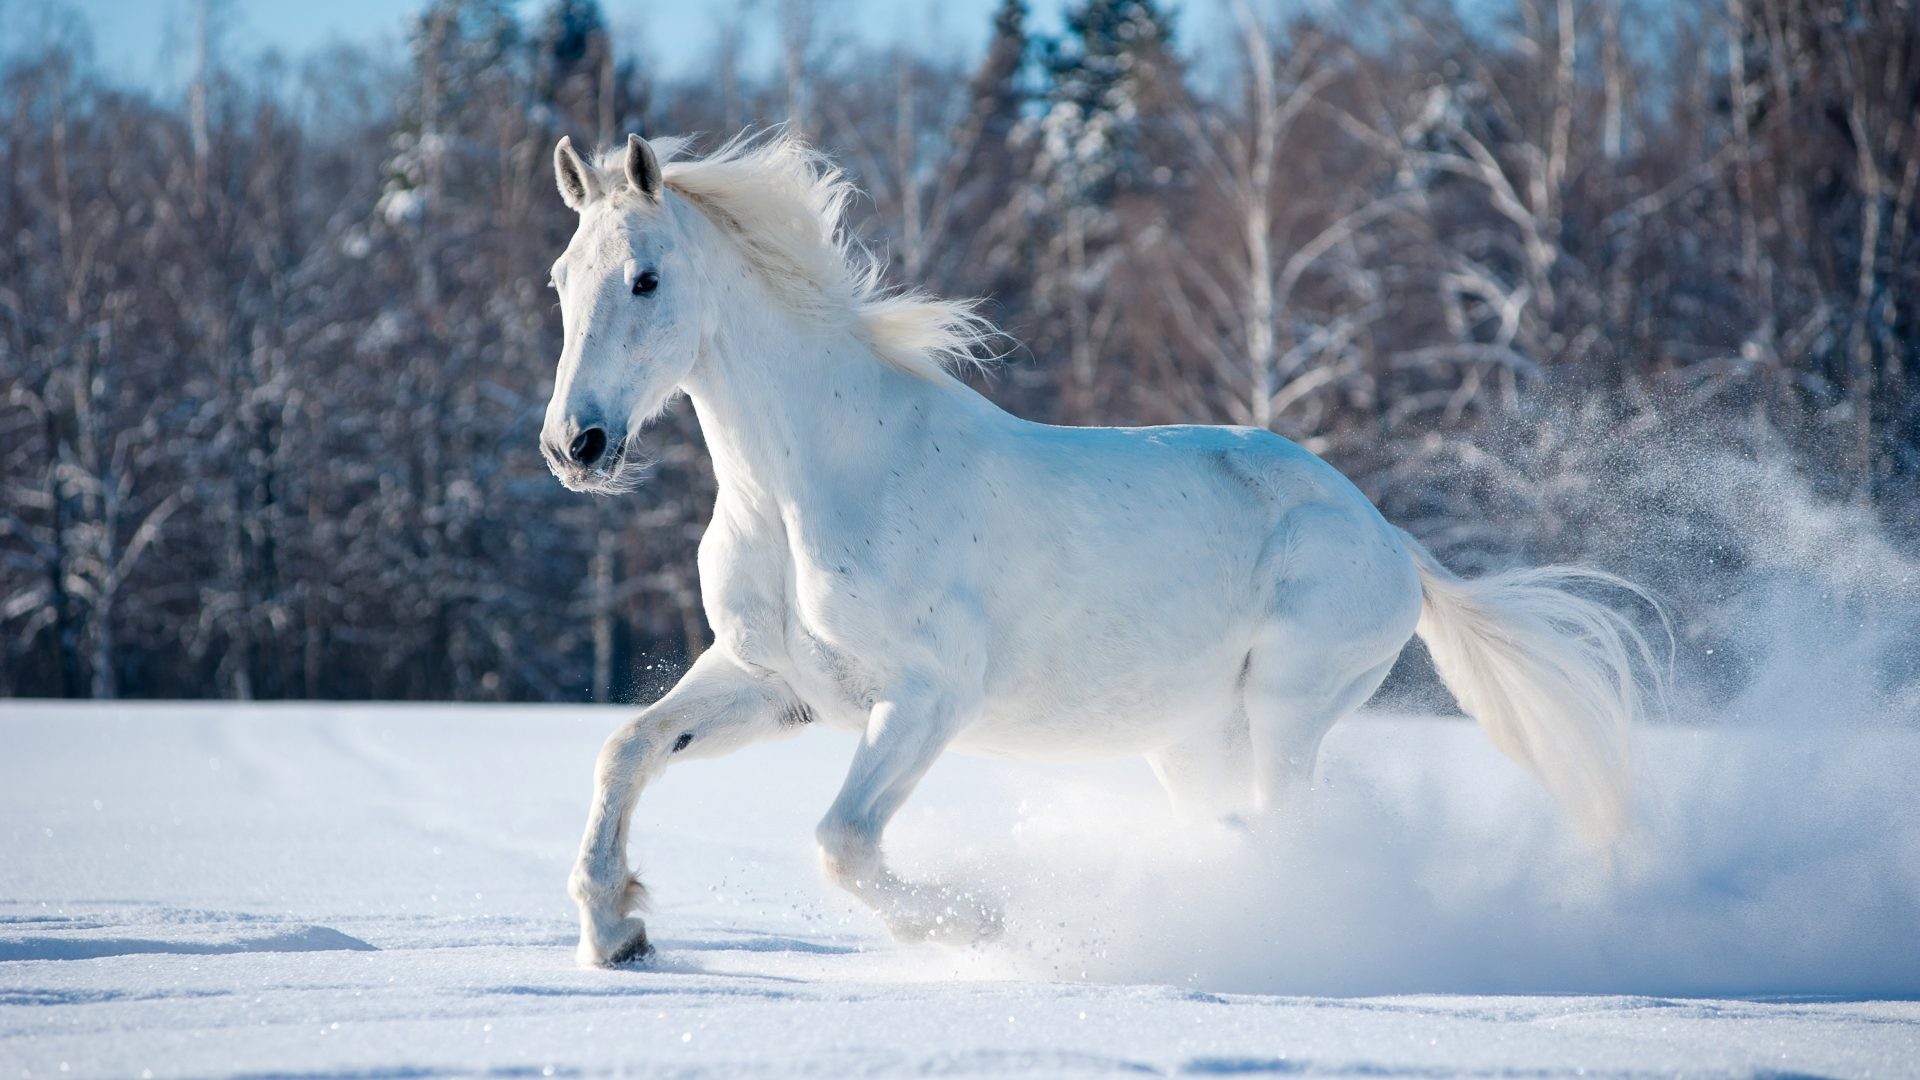 1920x1080 Horse Tag - Snow Horse Nature Winter Landscape Animals Hd Pic Download for  HD 16: